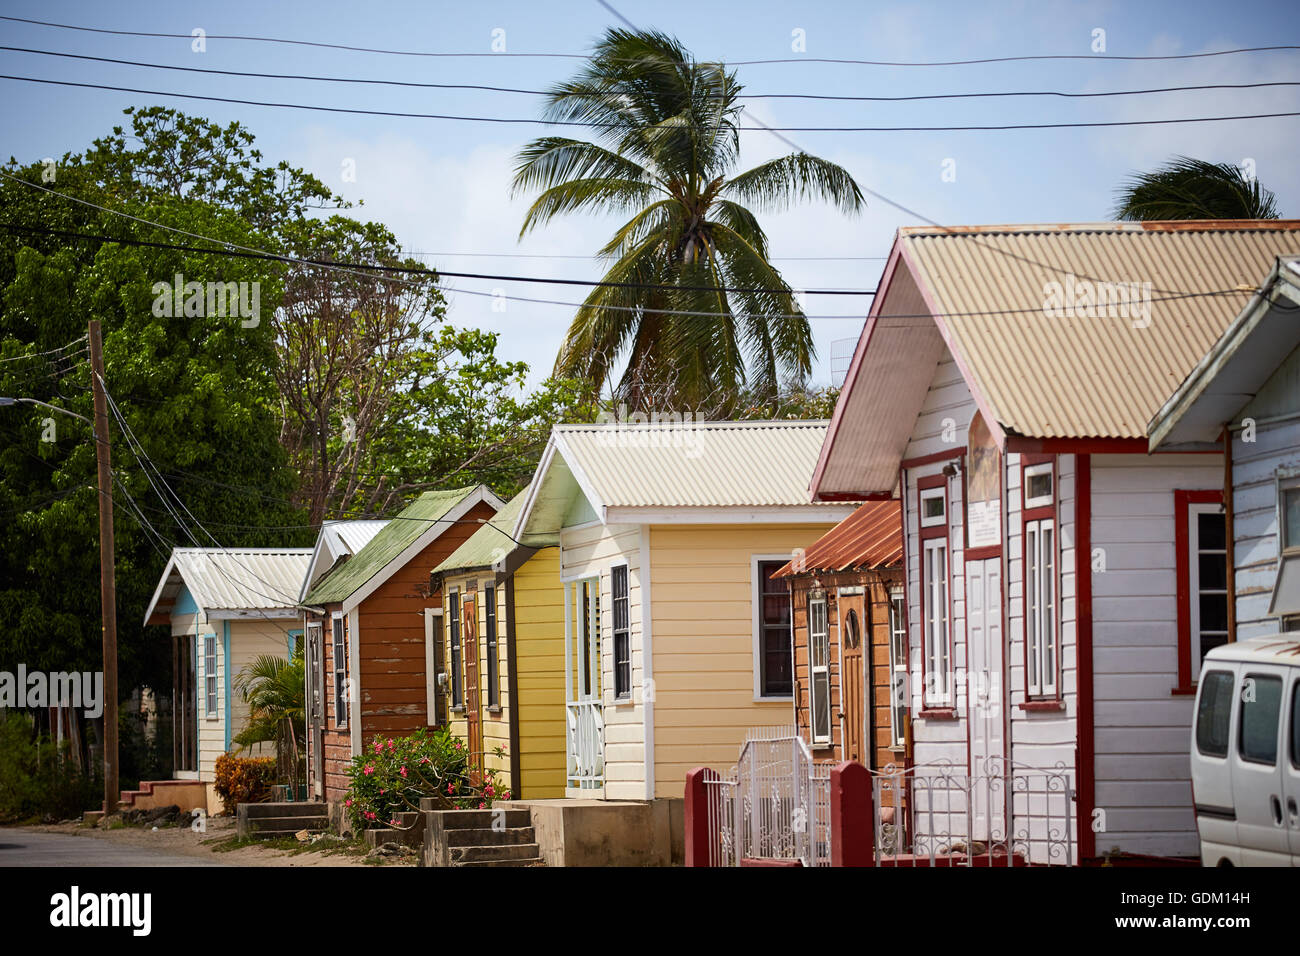 The Lesser Antilles Barbados Parish west indies Barbados a Heywoods beach shack houses bright colours colors wooden small Stock Photo